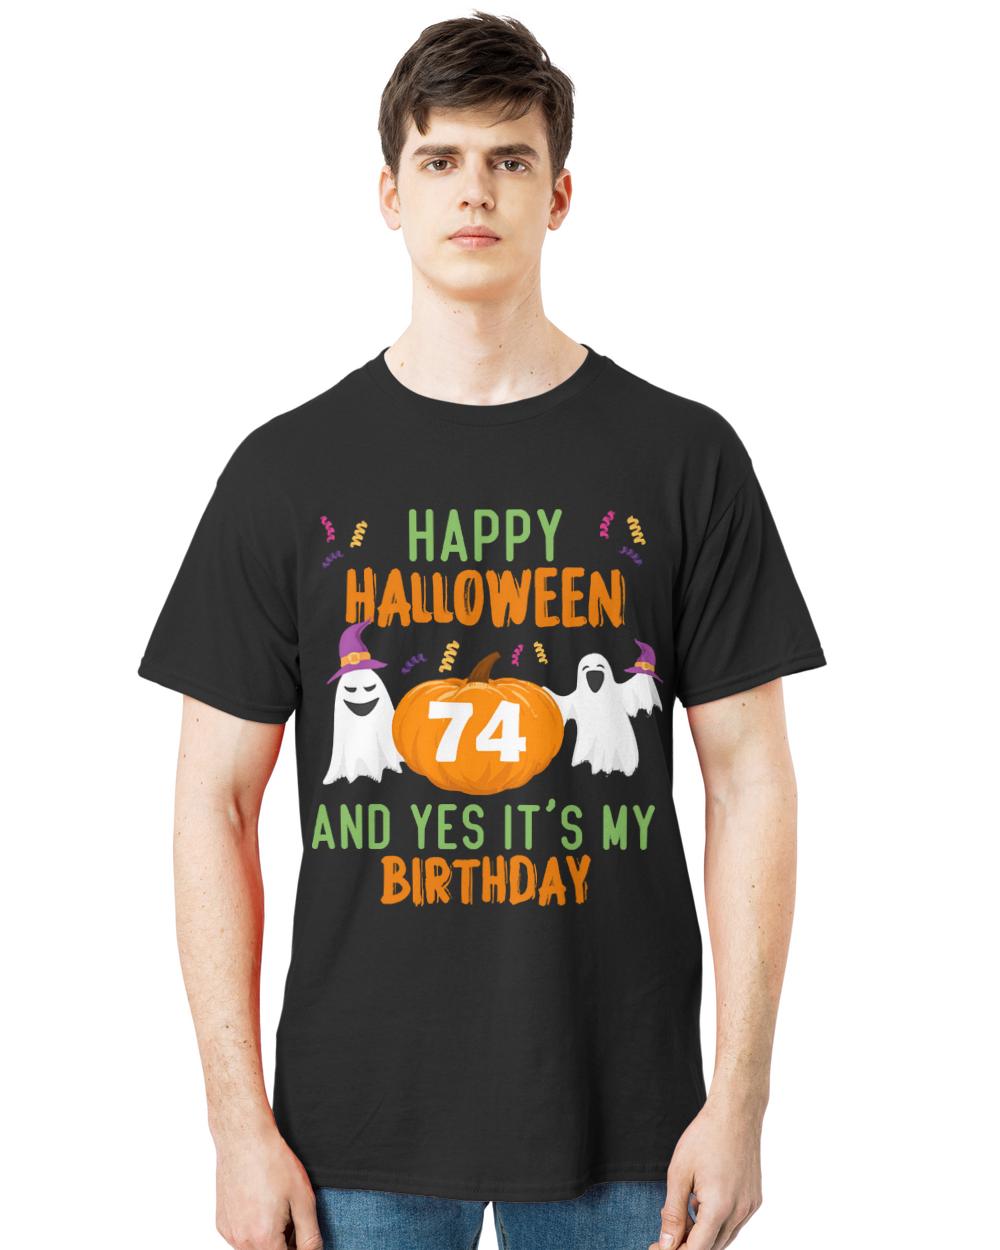 Halloween 74th Birthday T- Shirt Happy Halloween And Yes It’s My 74th Birthday, 74 year old halloween gift T- Shirt